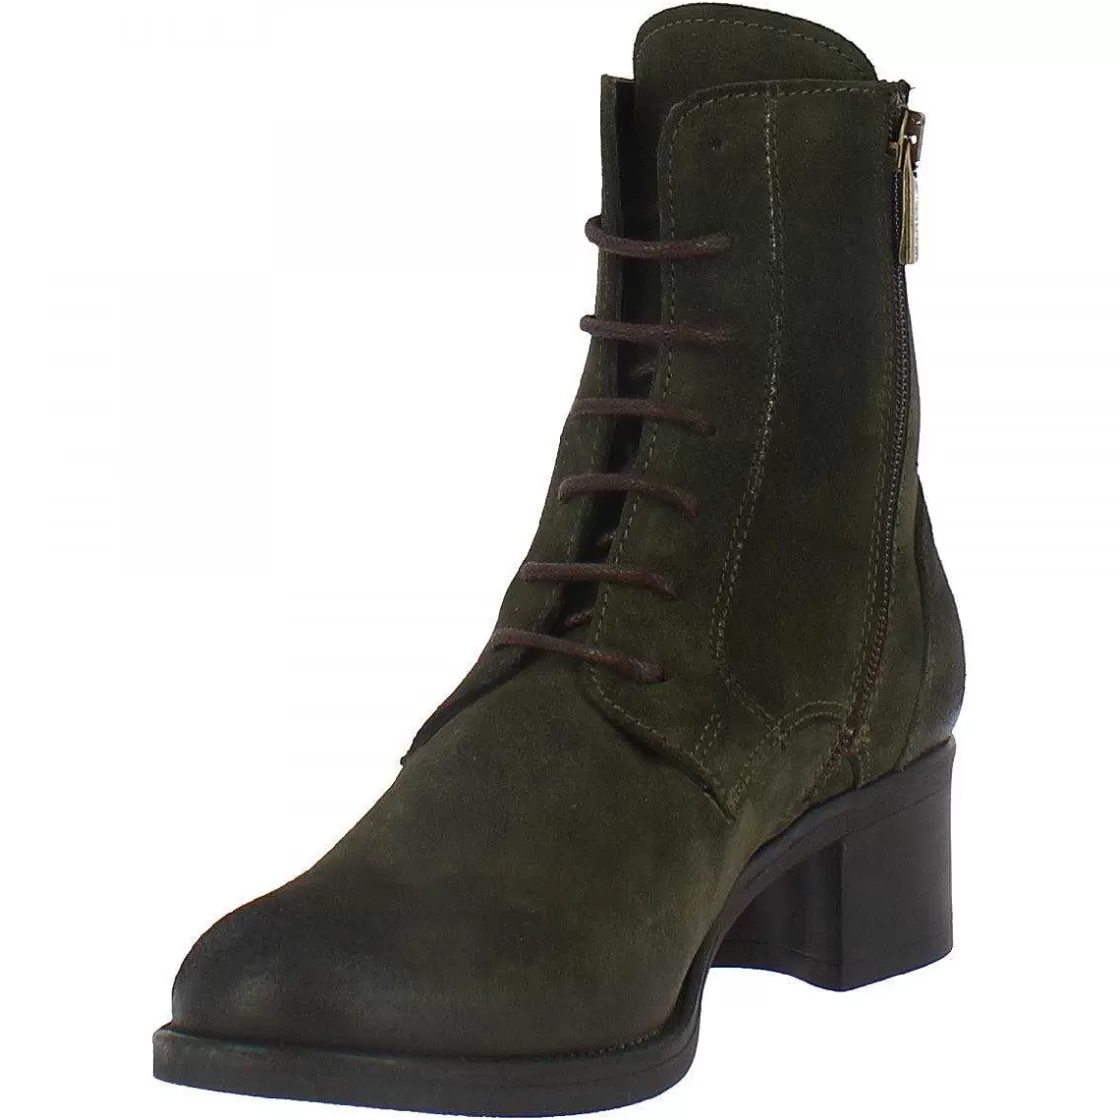 Leonardo Women'S Handmade Lace-Up Ankle Boots In Green Suede Leather Shop